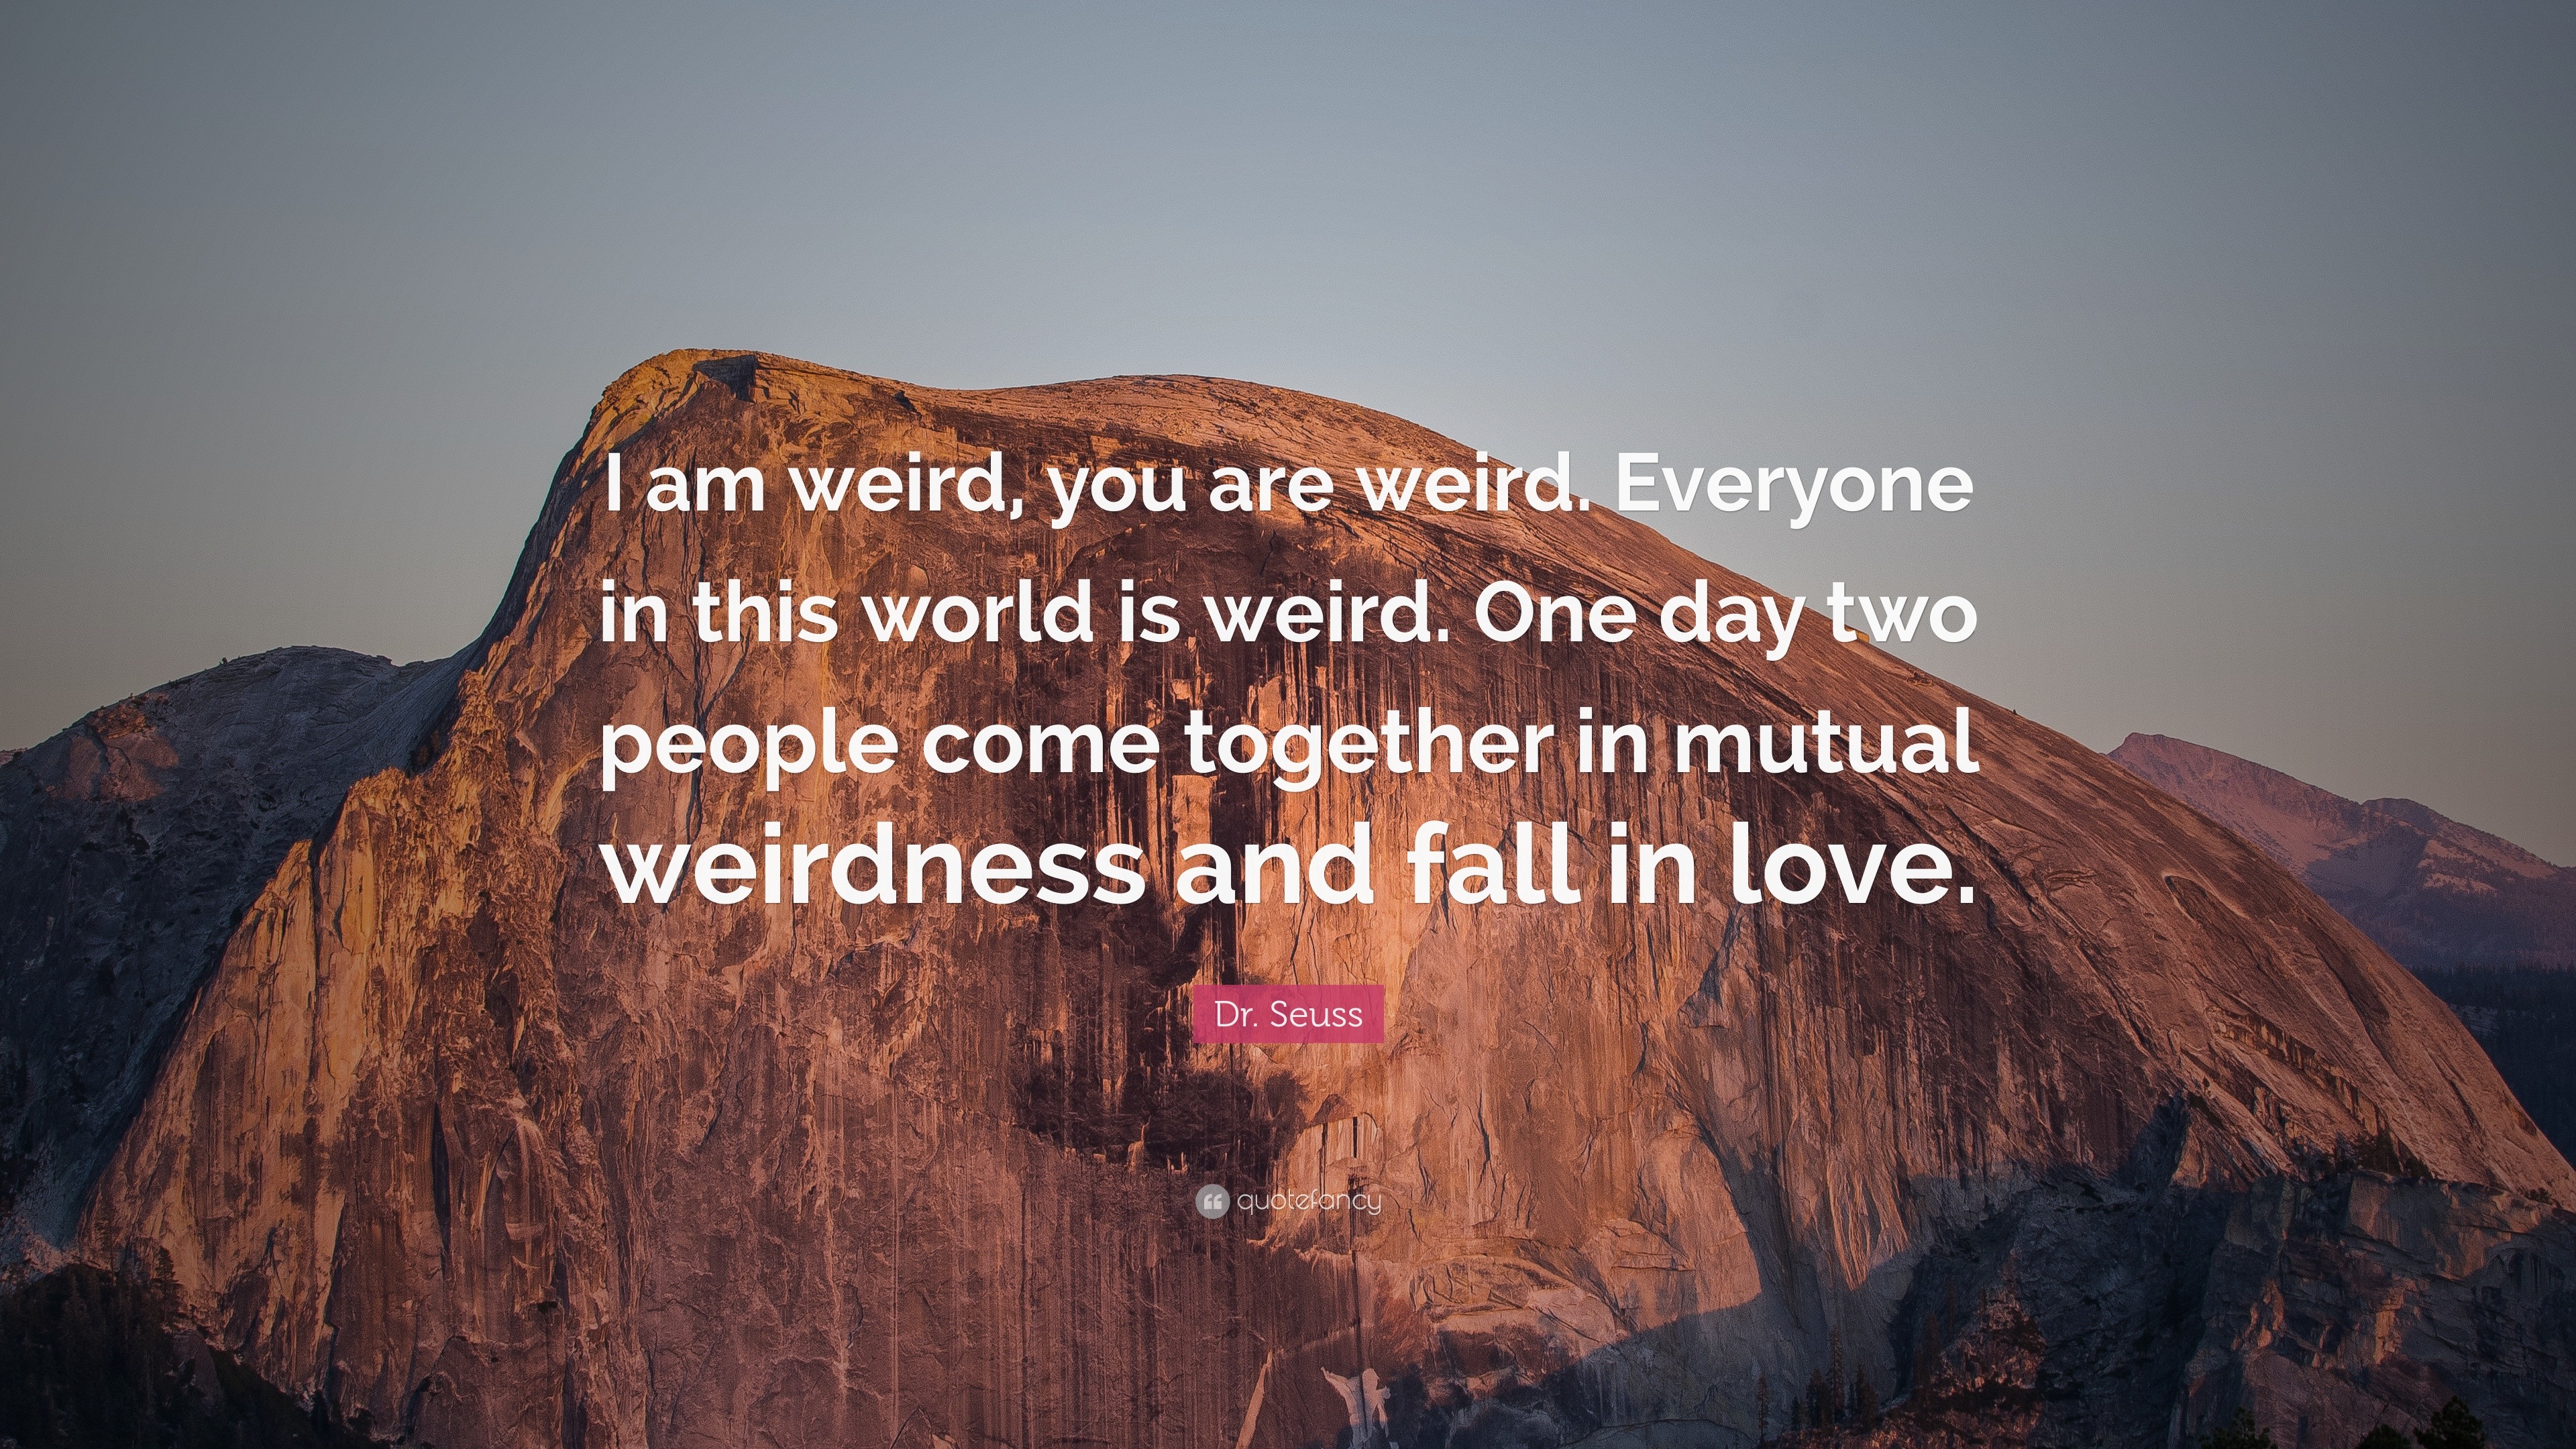 Dr. Seuss Quote “I am weird, you are weird. Everyone in